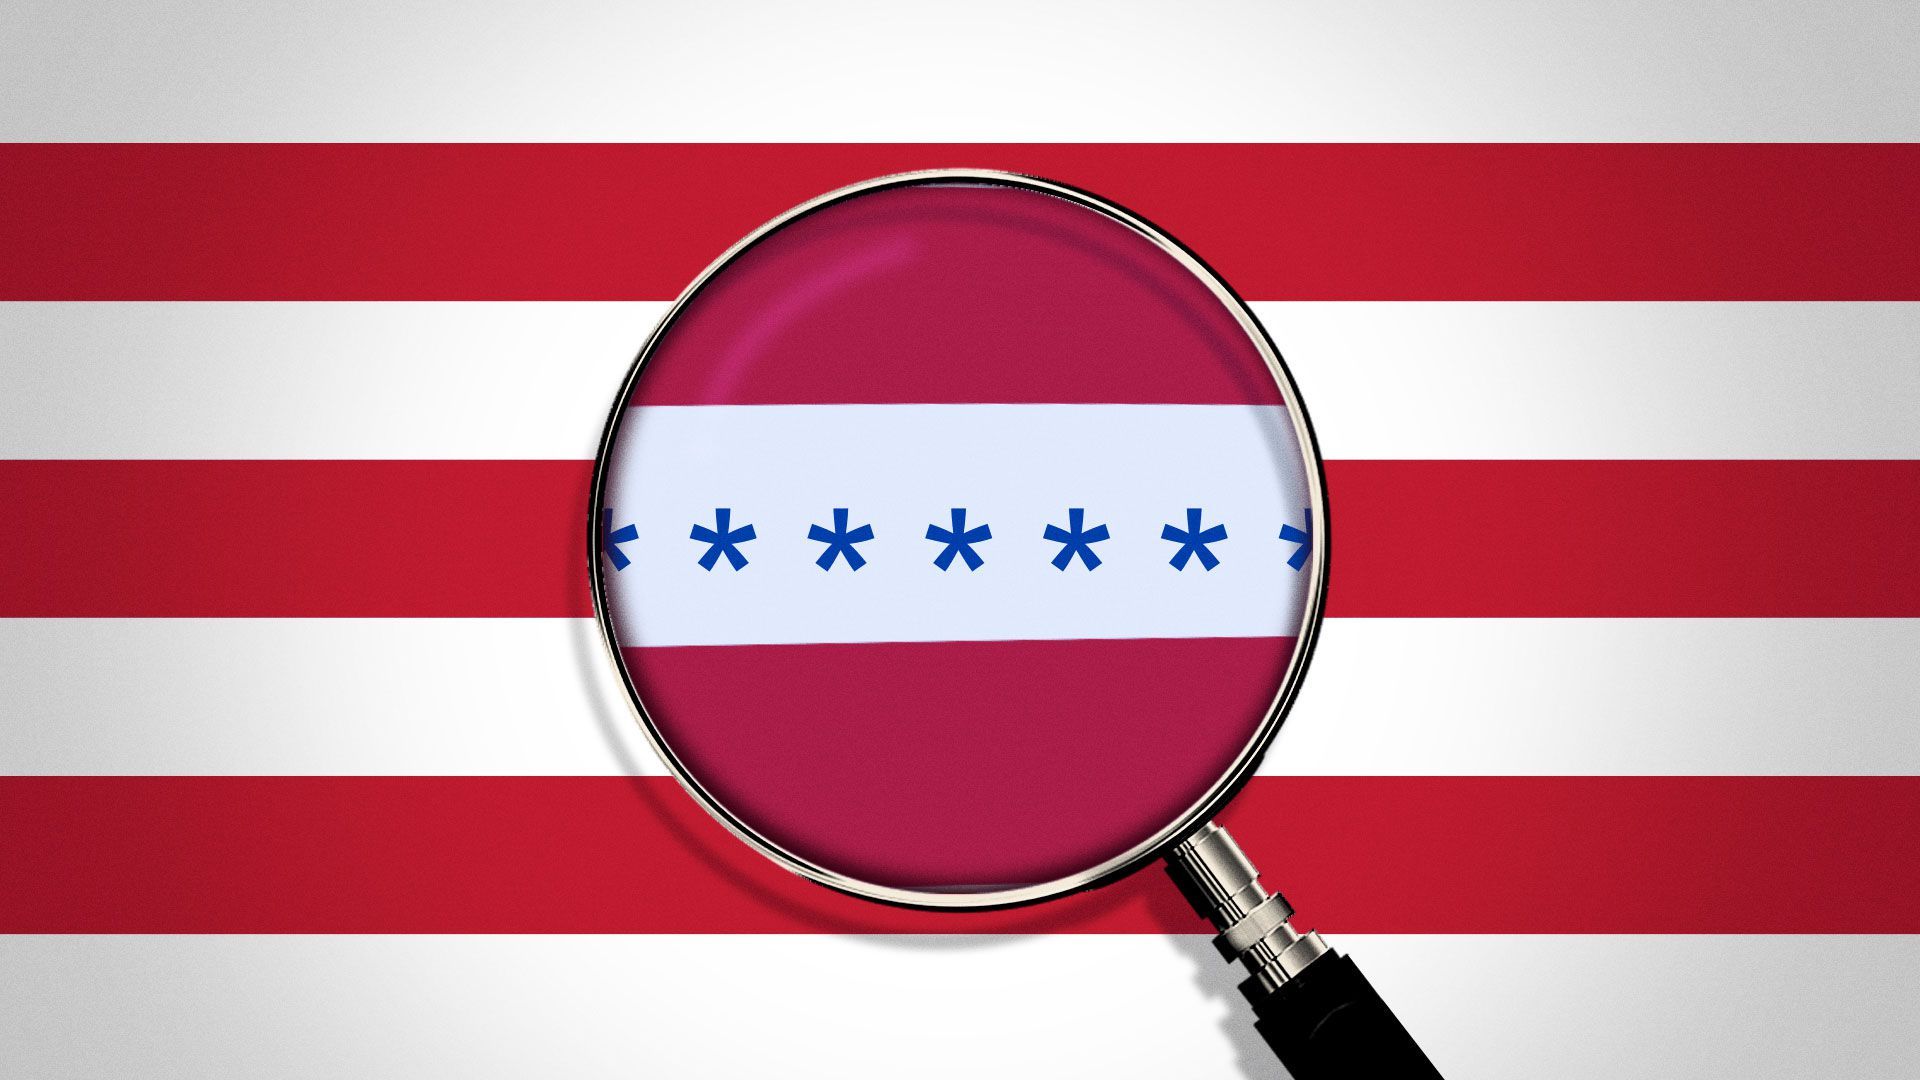 Illustration of a magnifying glass over the US flag stripes revealing a password